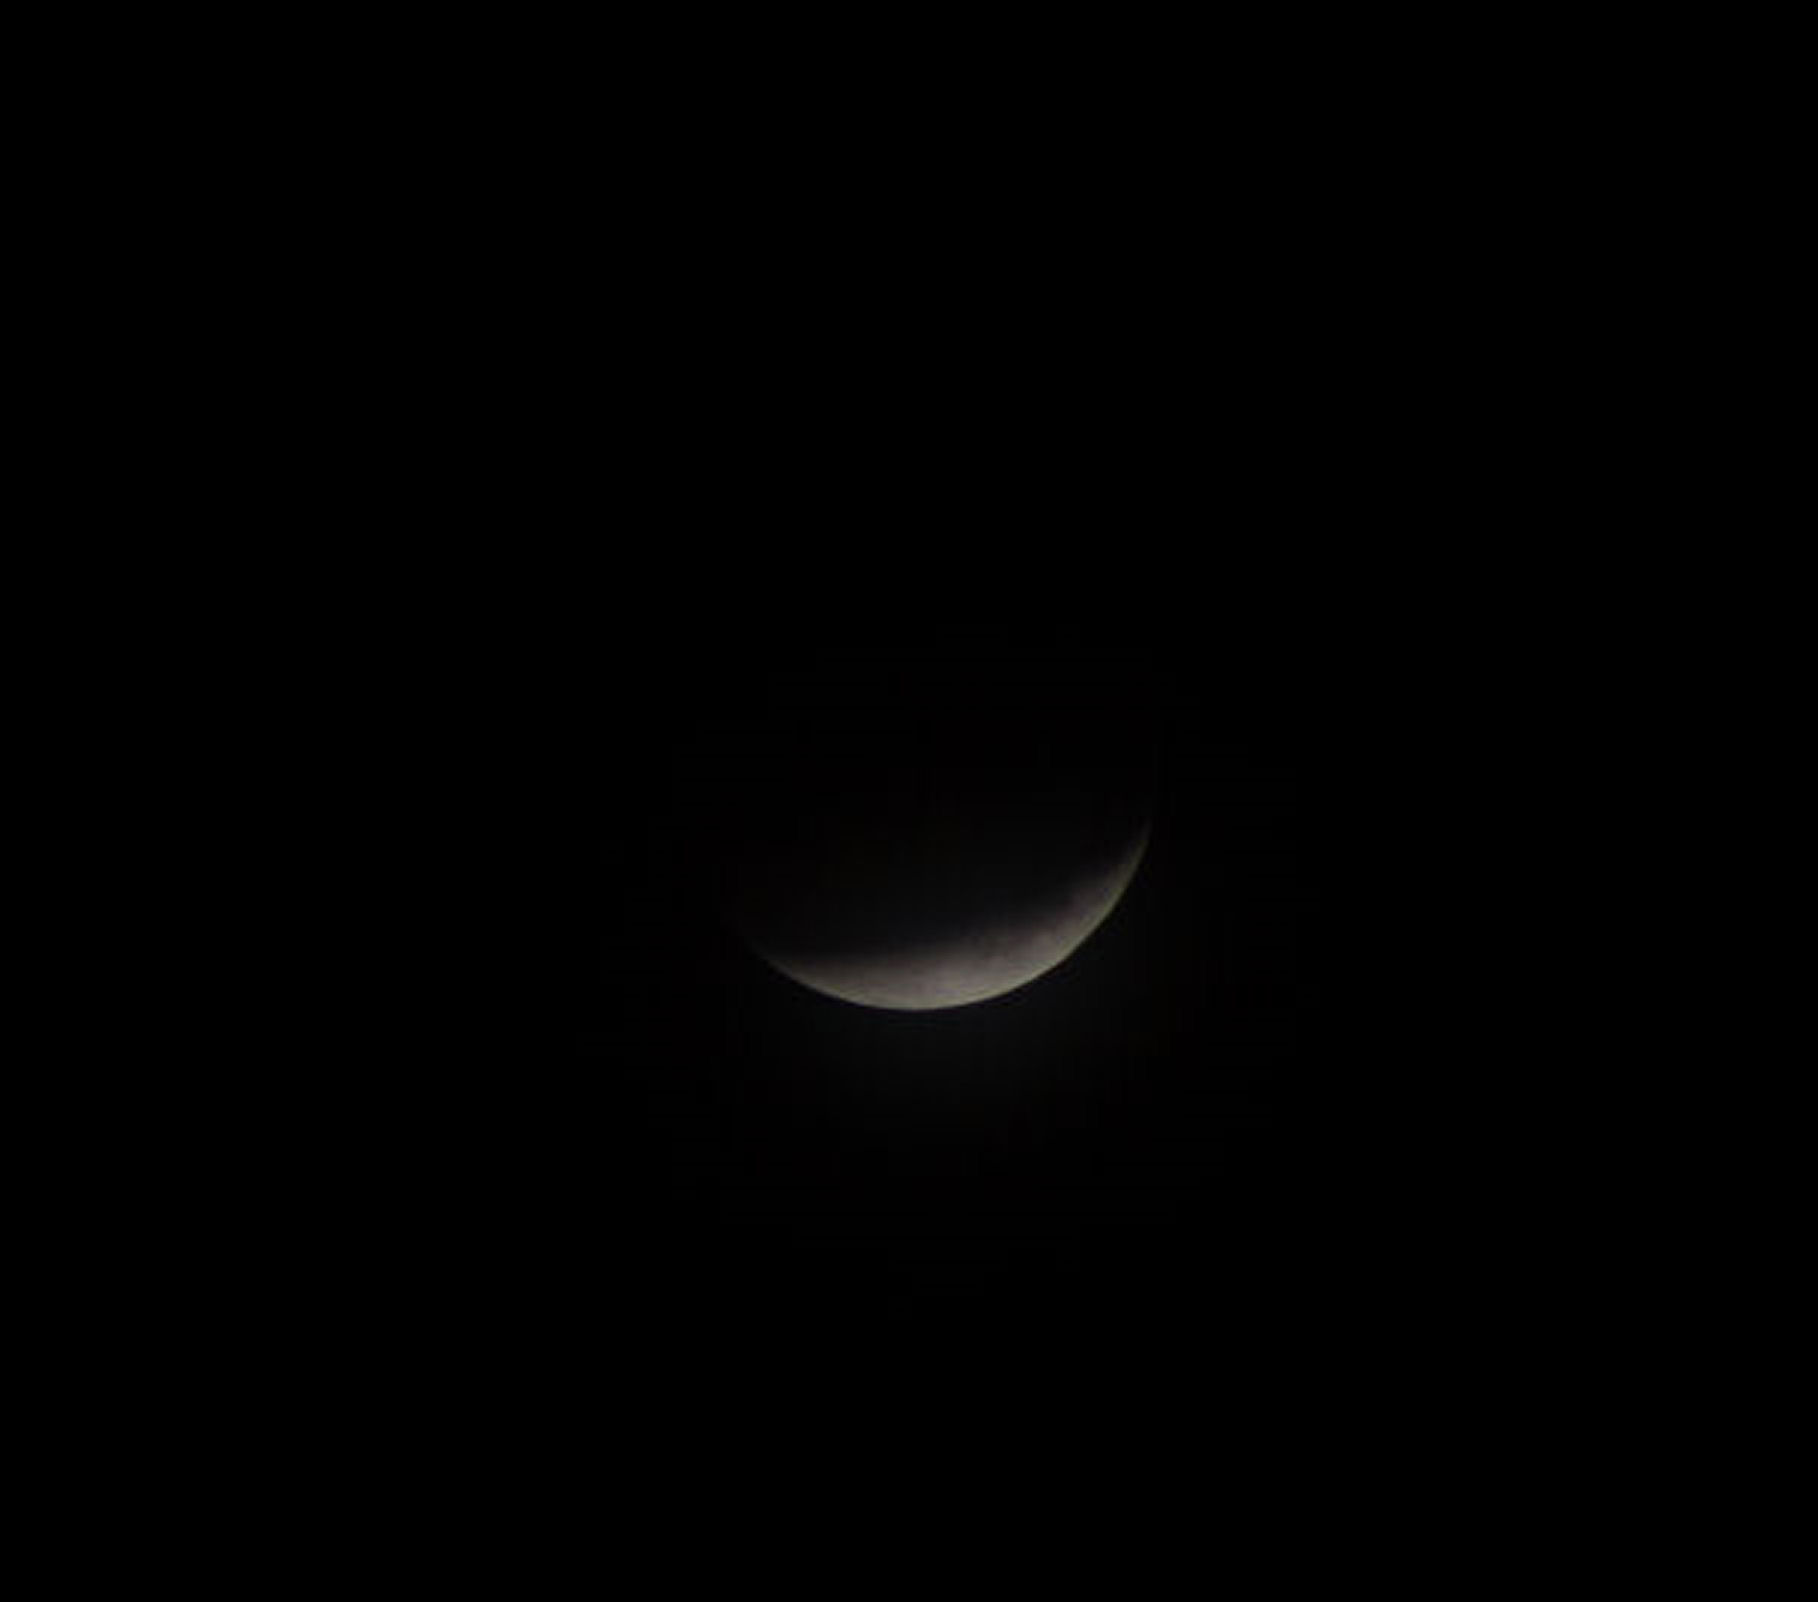 Lunar Eclipse By Andy Heenan .  Canon EOS 6000D f/5.6.  1/40th second.  ISO-400